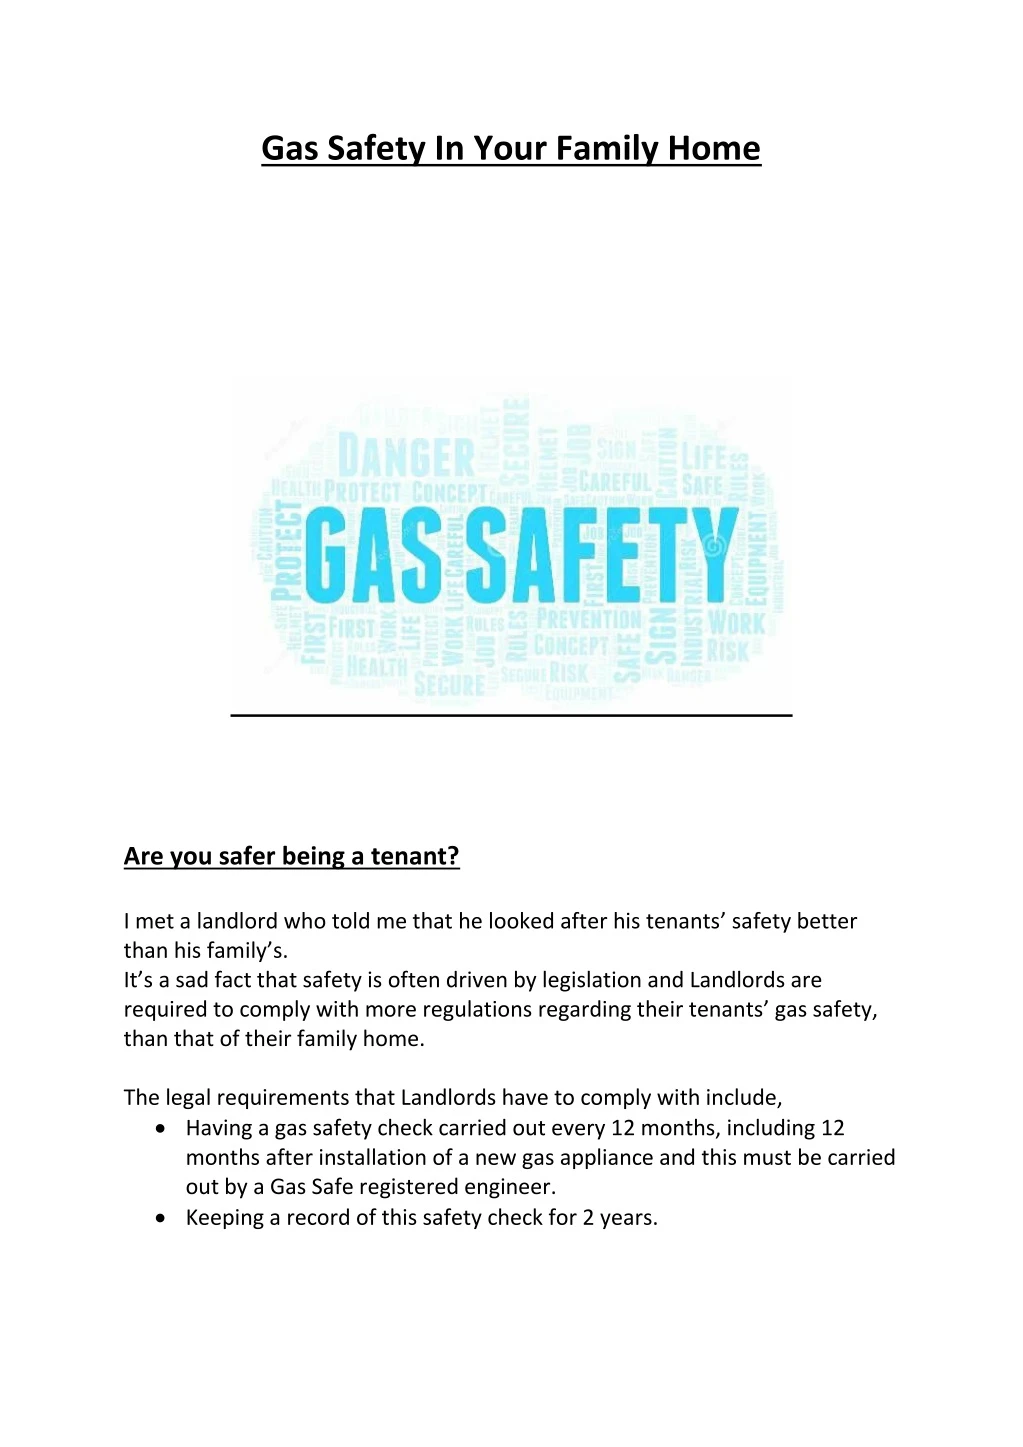 gas safety in your family home